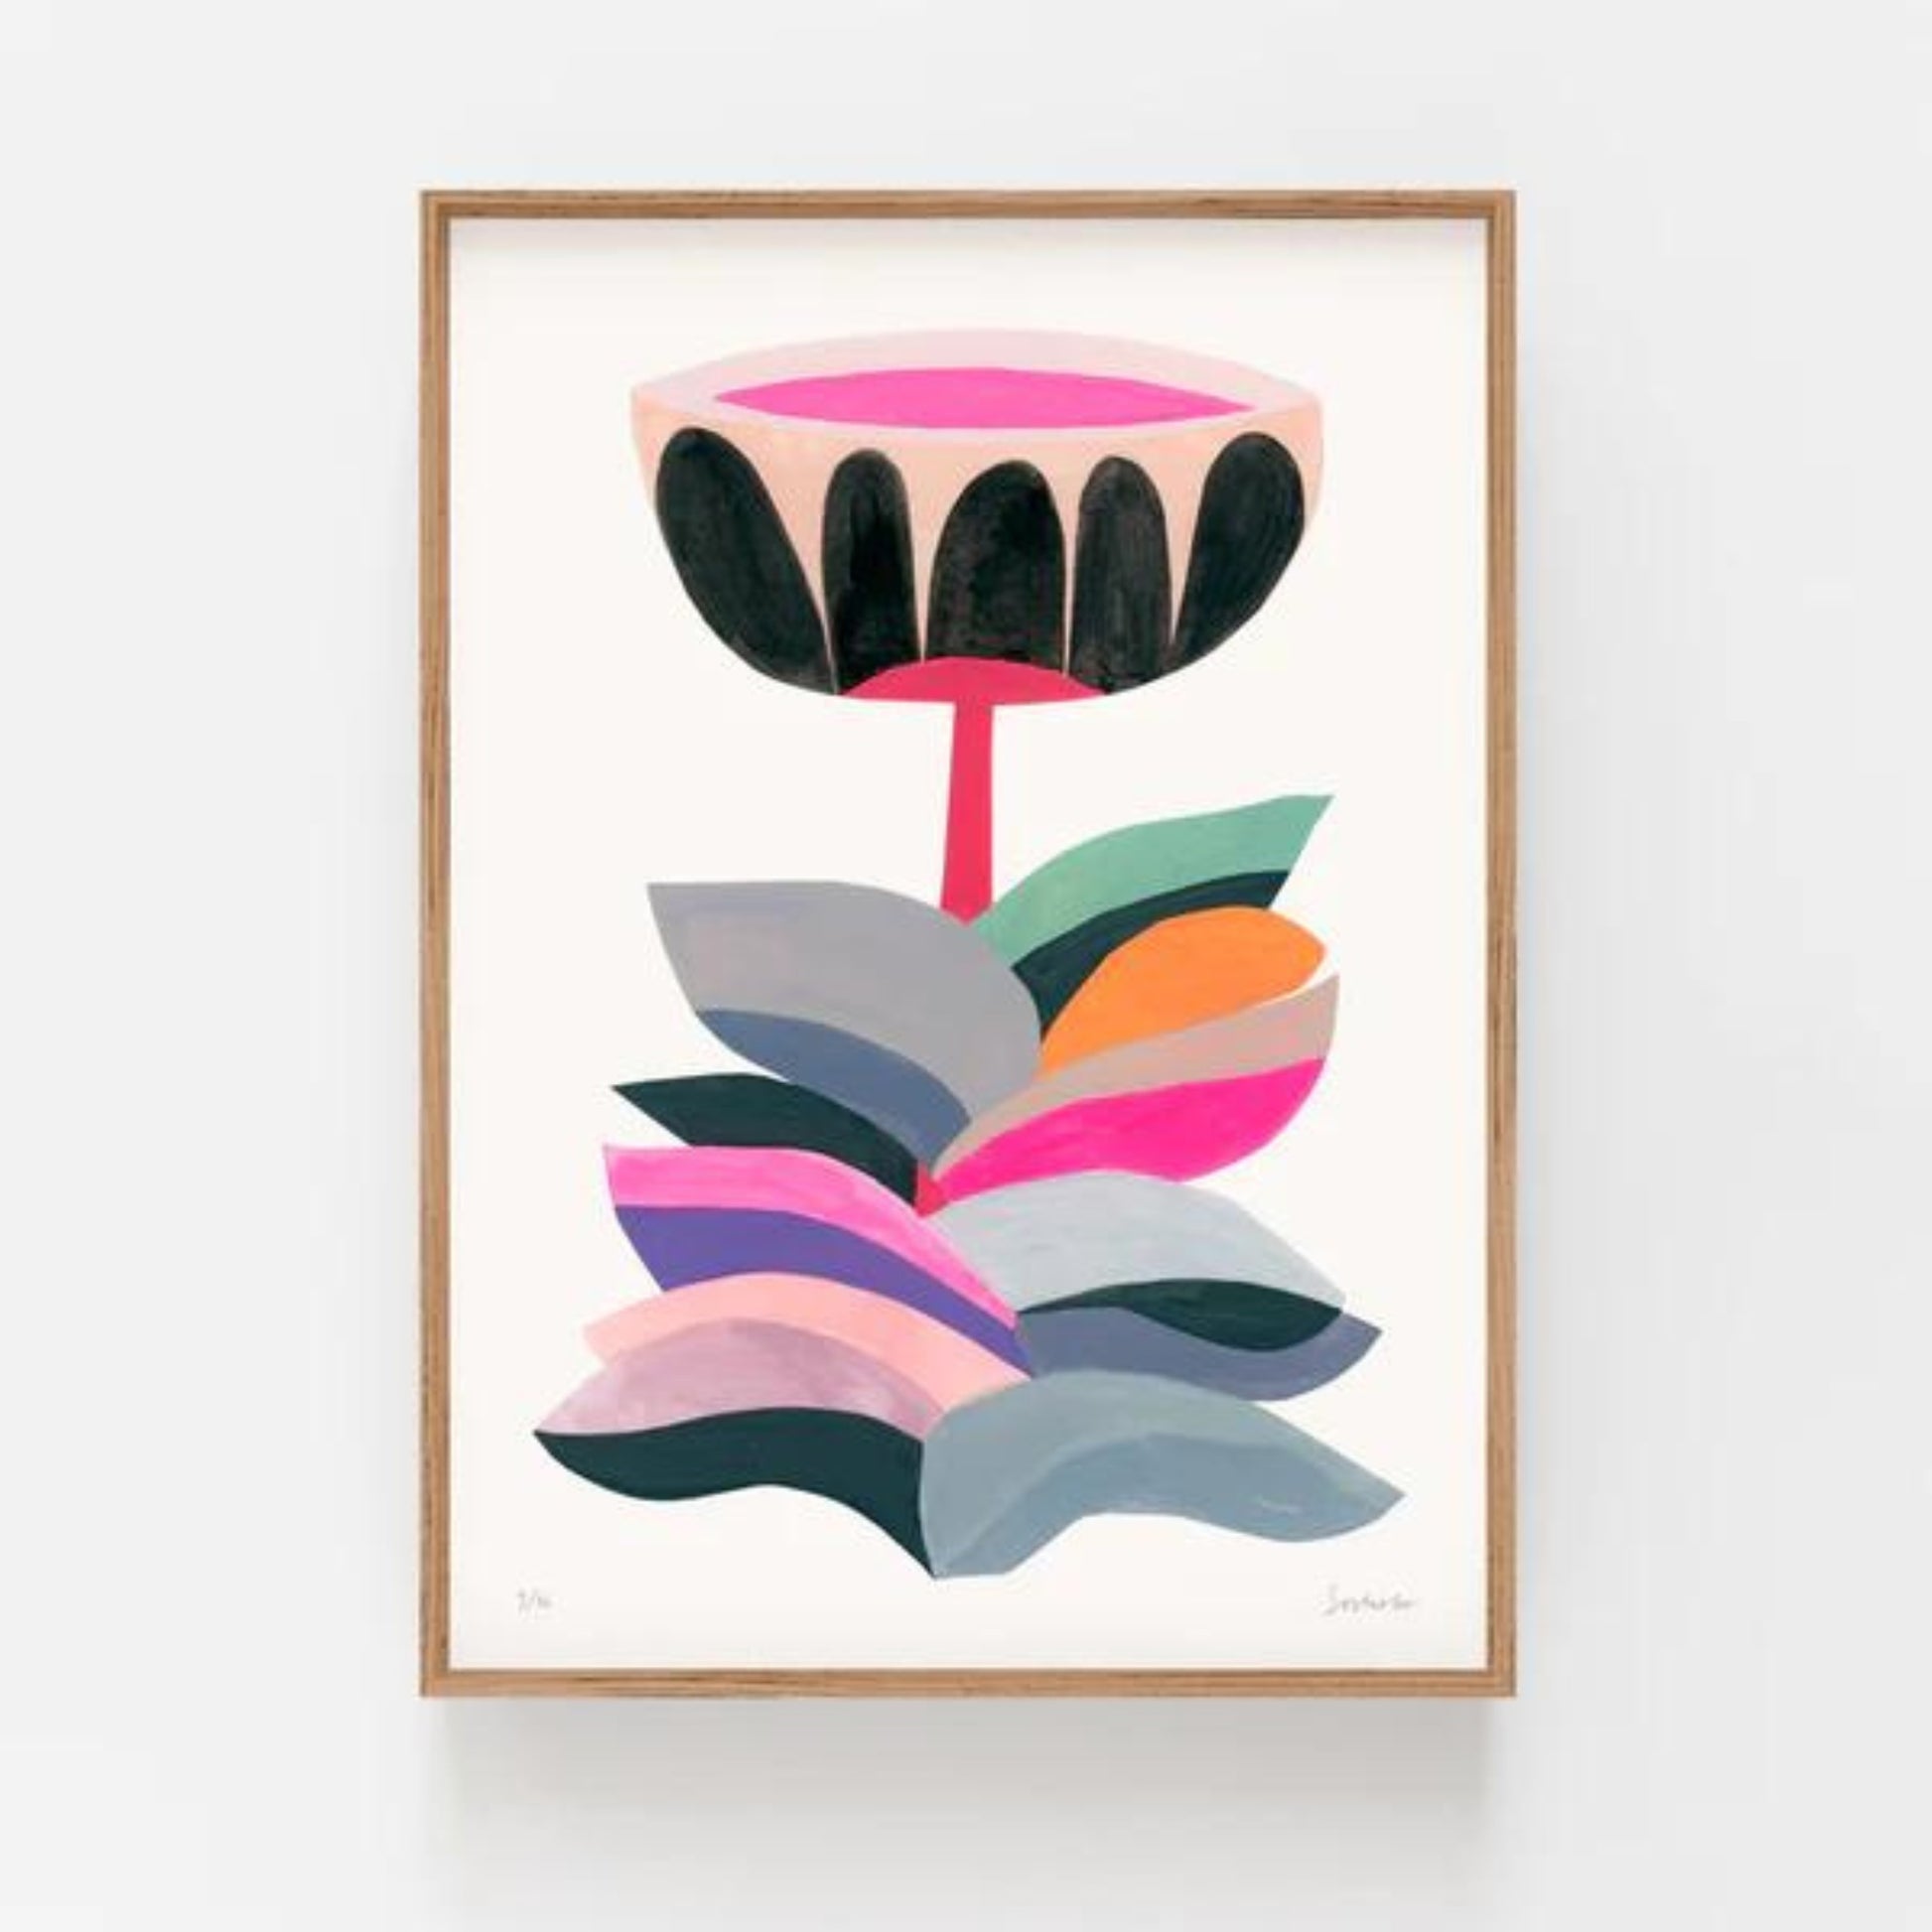 Colourful Print of an Abstract Flower